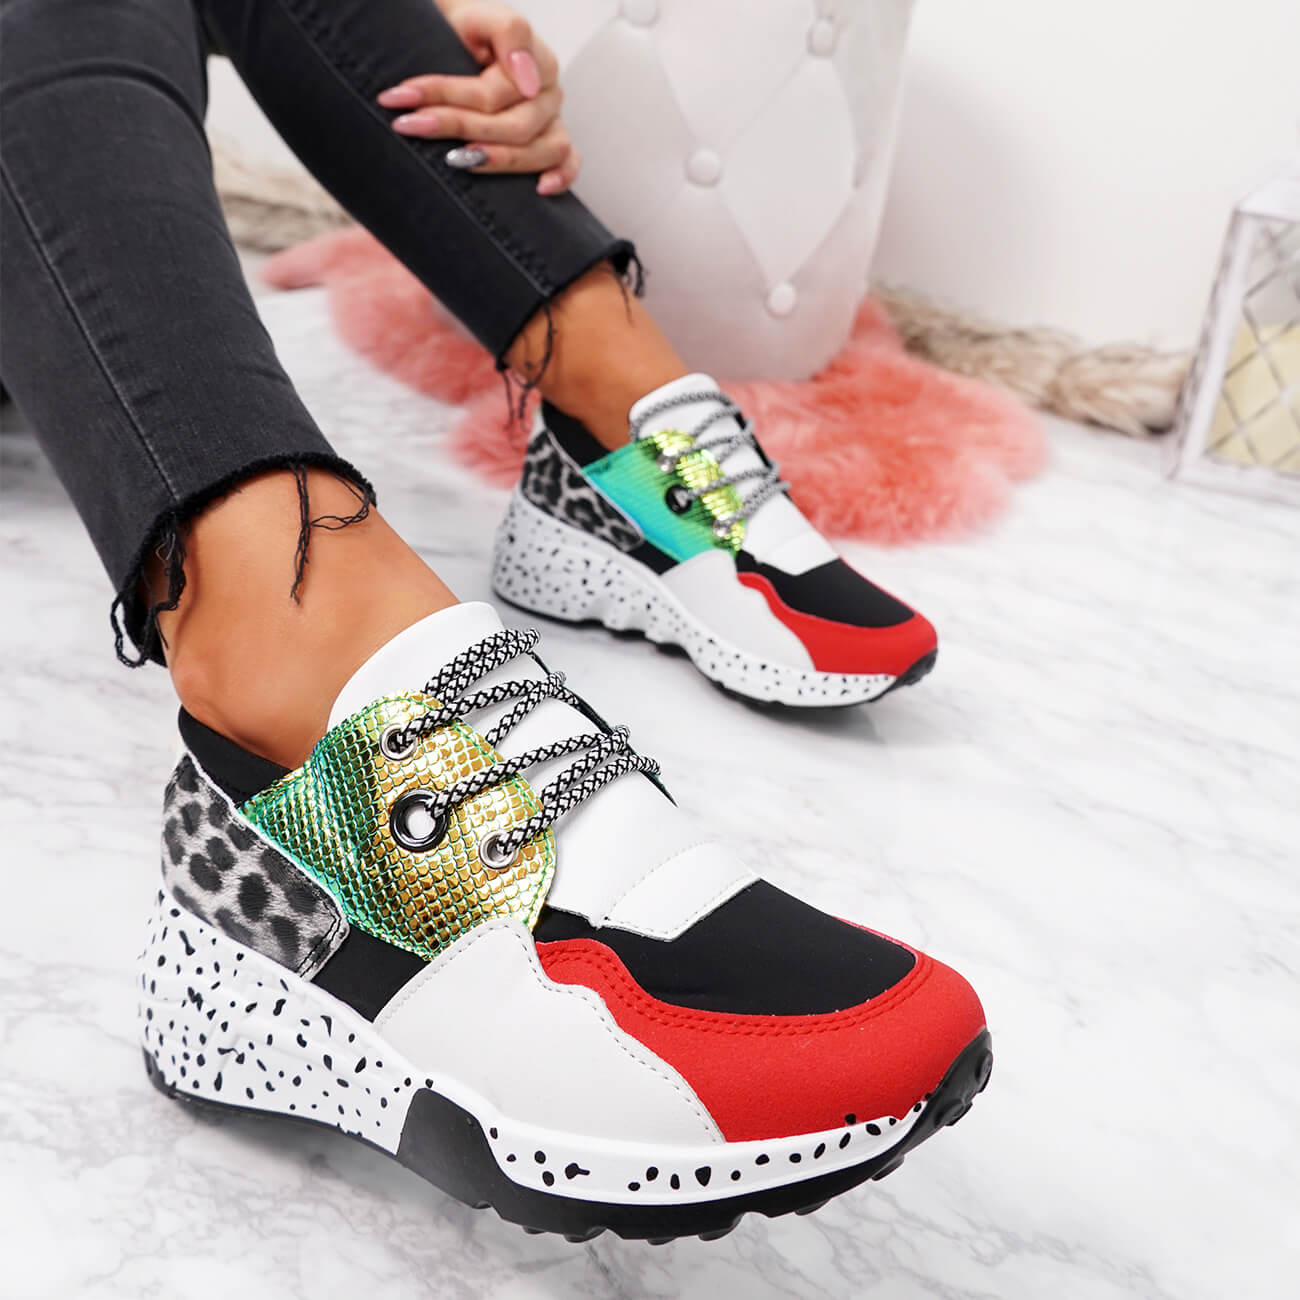 WOMENS LADIES LACE UP CHUNKY TRAINERS SPORTS FASHION SNEAKERS ANIMAL PRINT SHOES